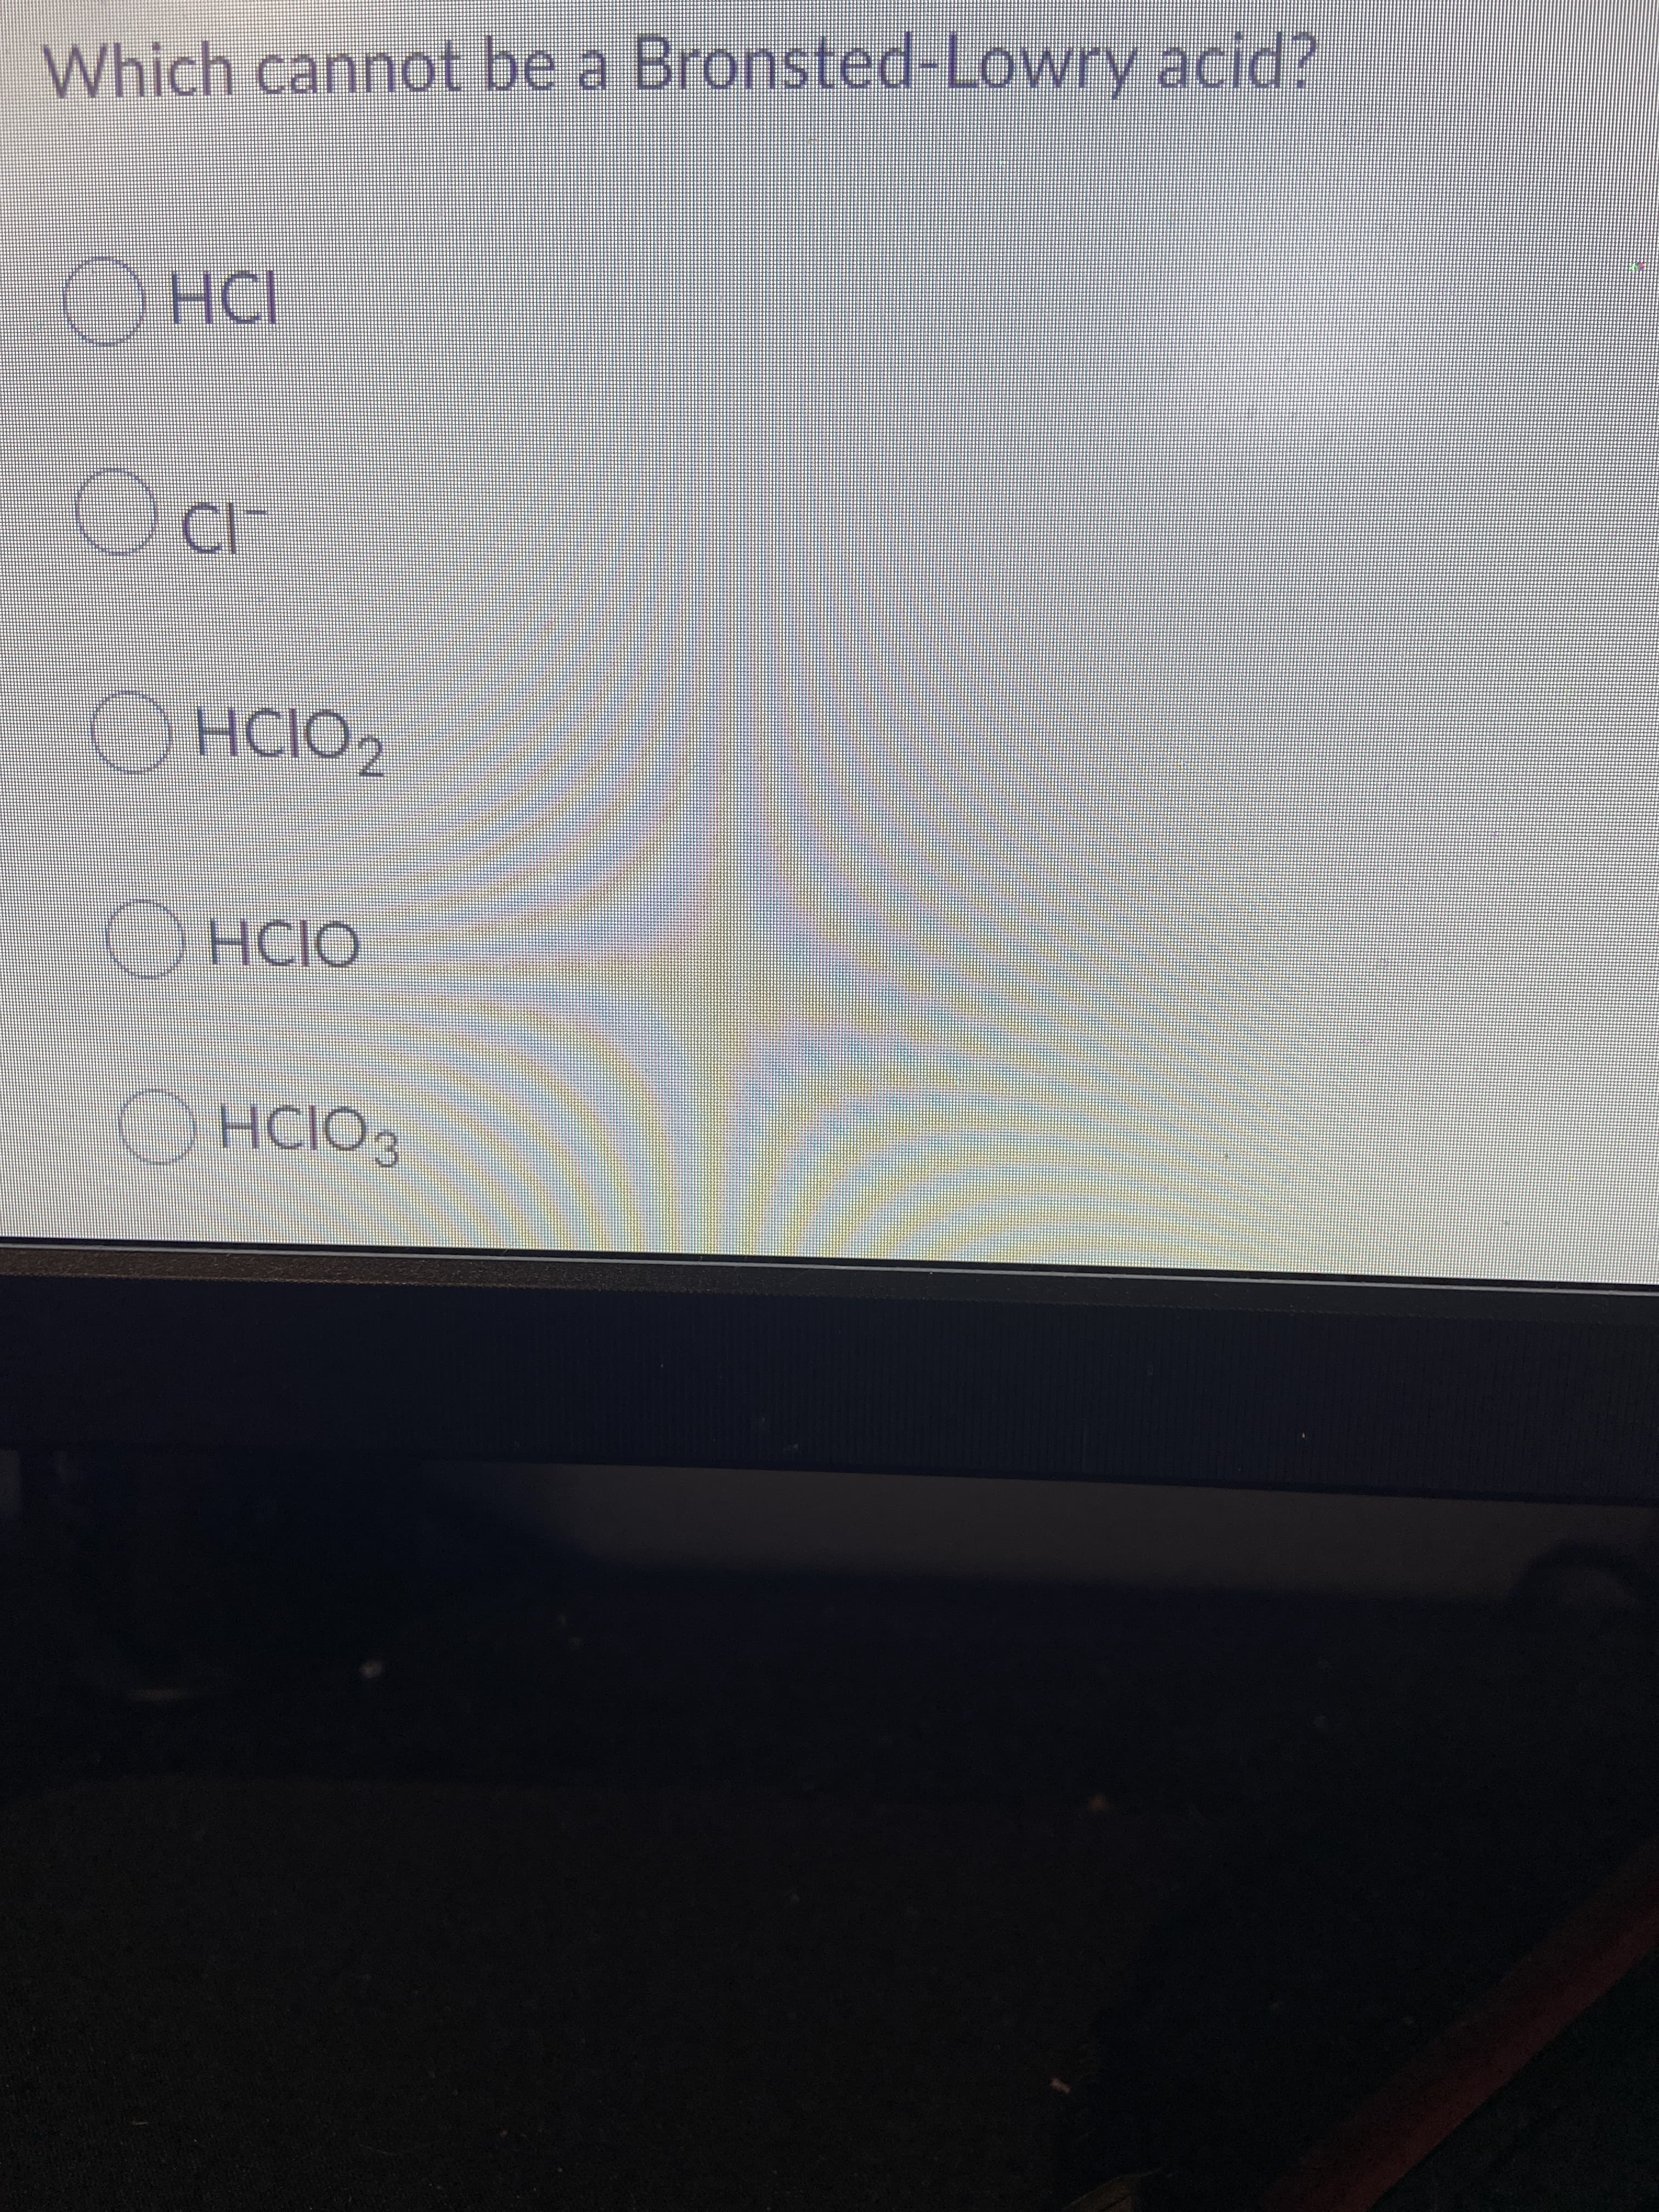 Which cannot be a Bronsted-Lowry acid?
HCI
HCIO
ODH O
